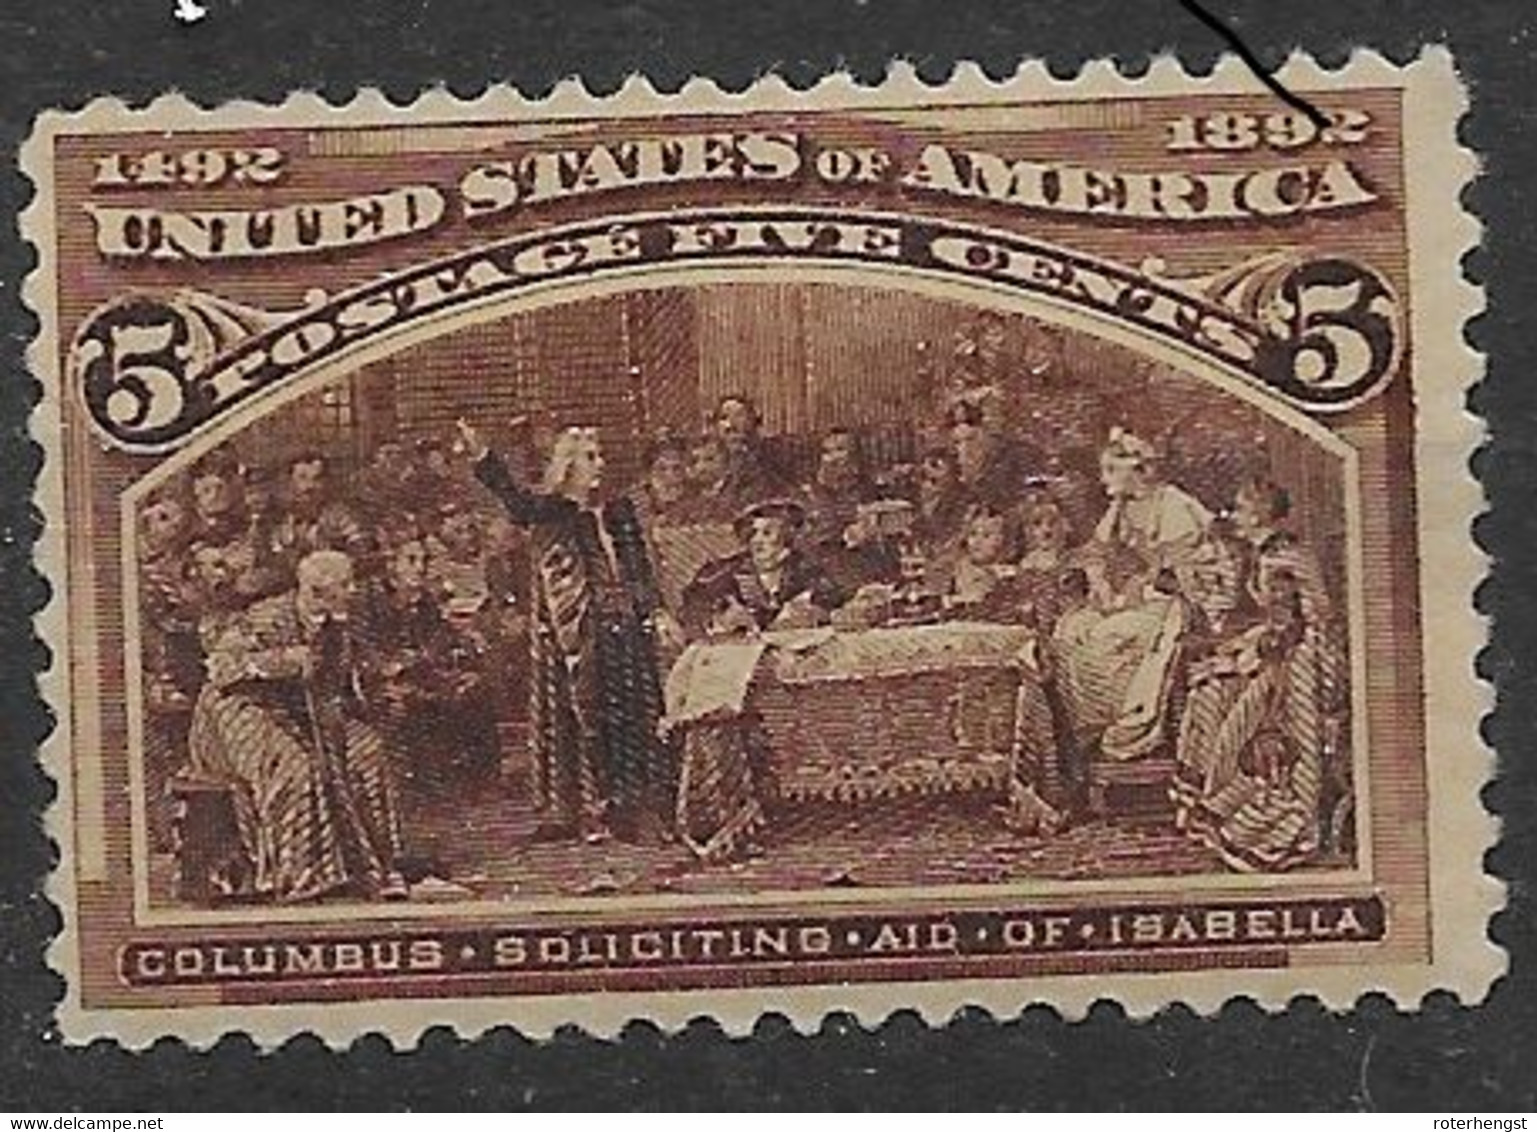 USA Columbus Mh * 1898 90 Euros Very Fine (no Ink On Stamp) - Unused Stamps